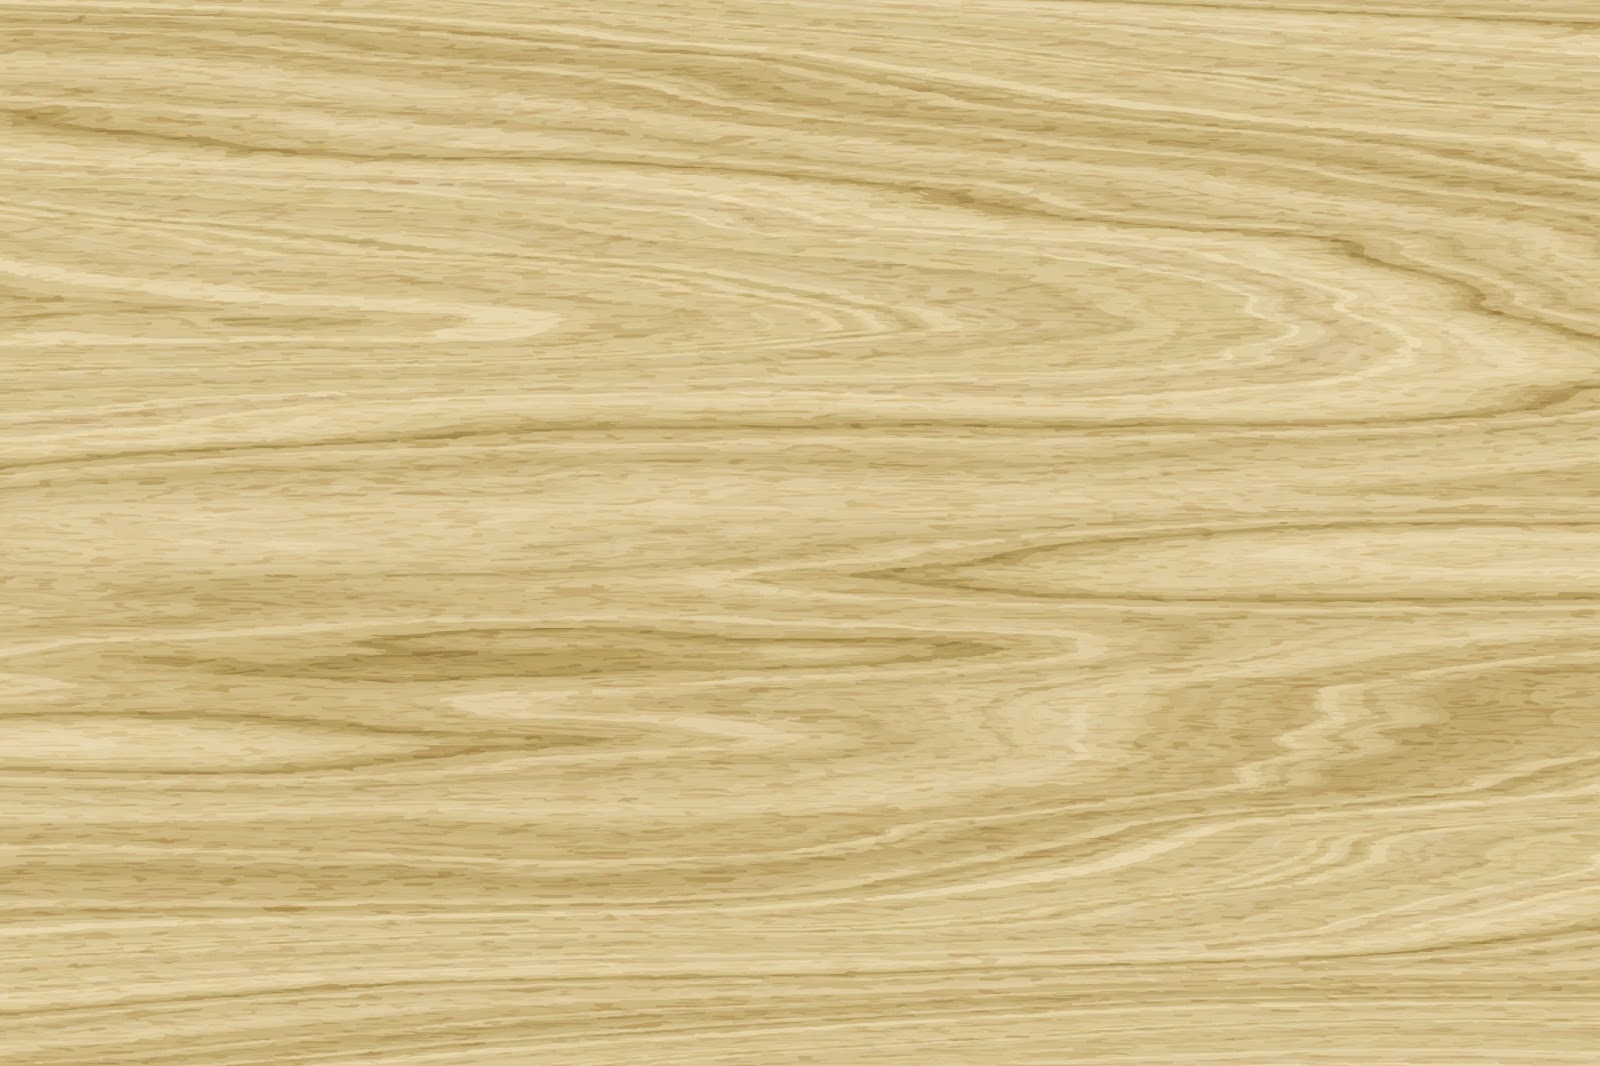 surface of sanded plywood